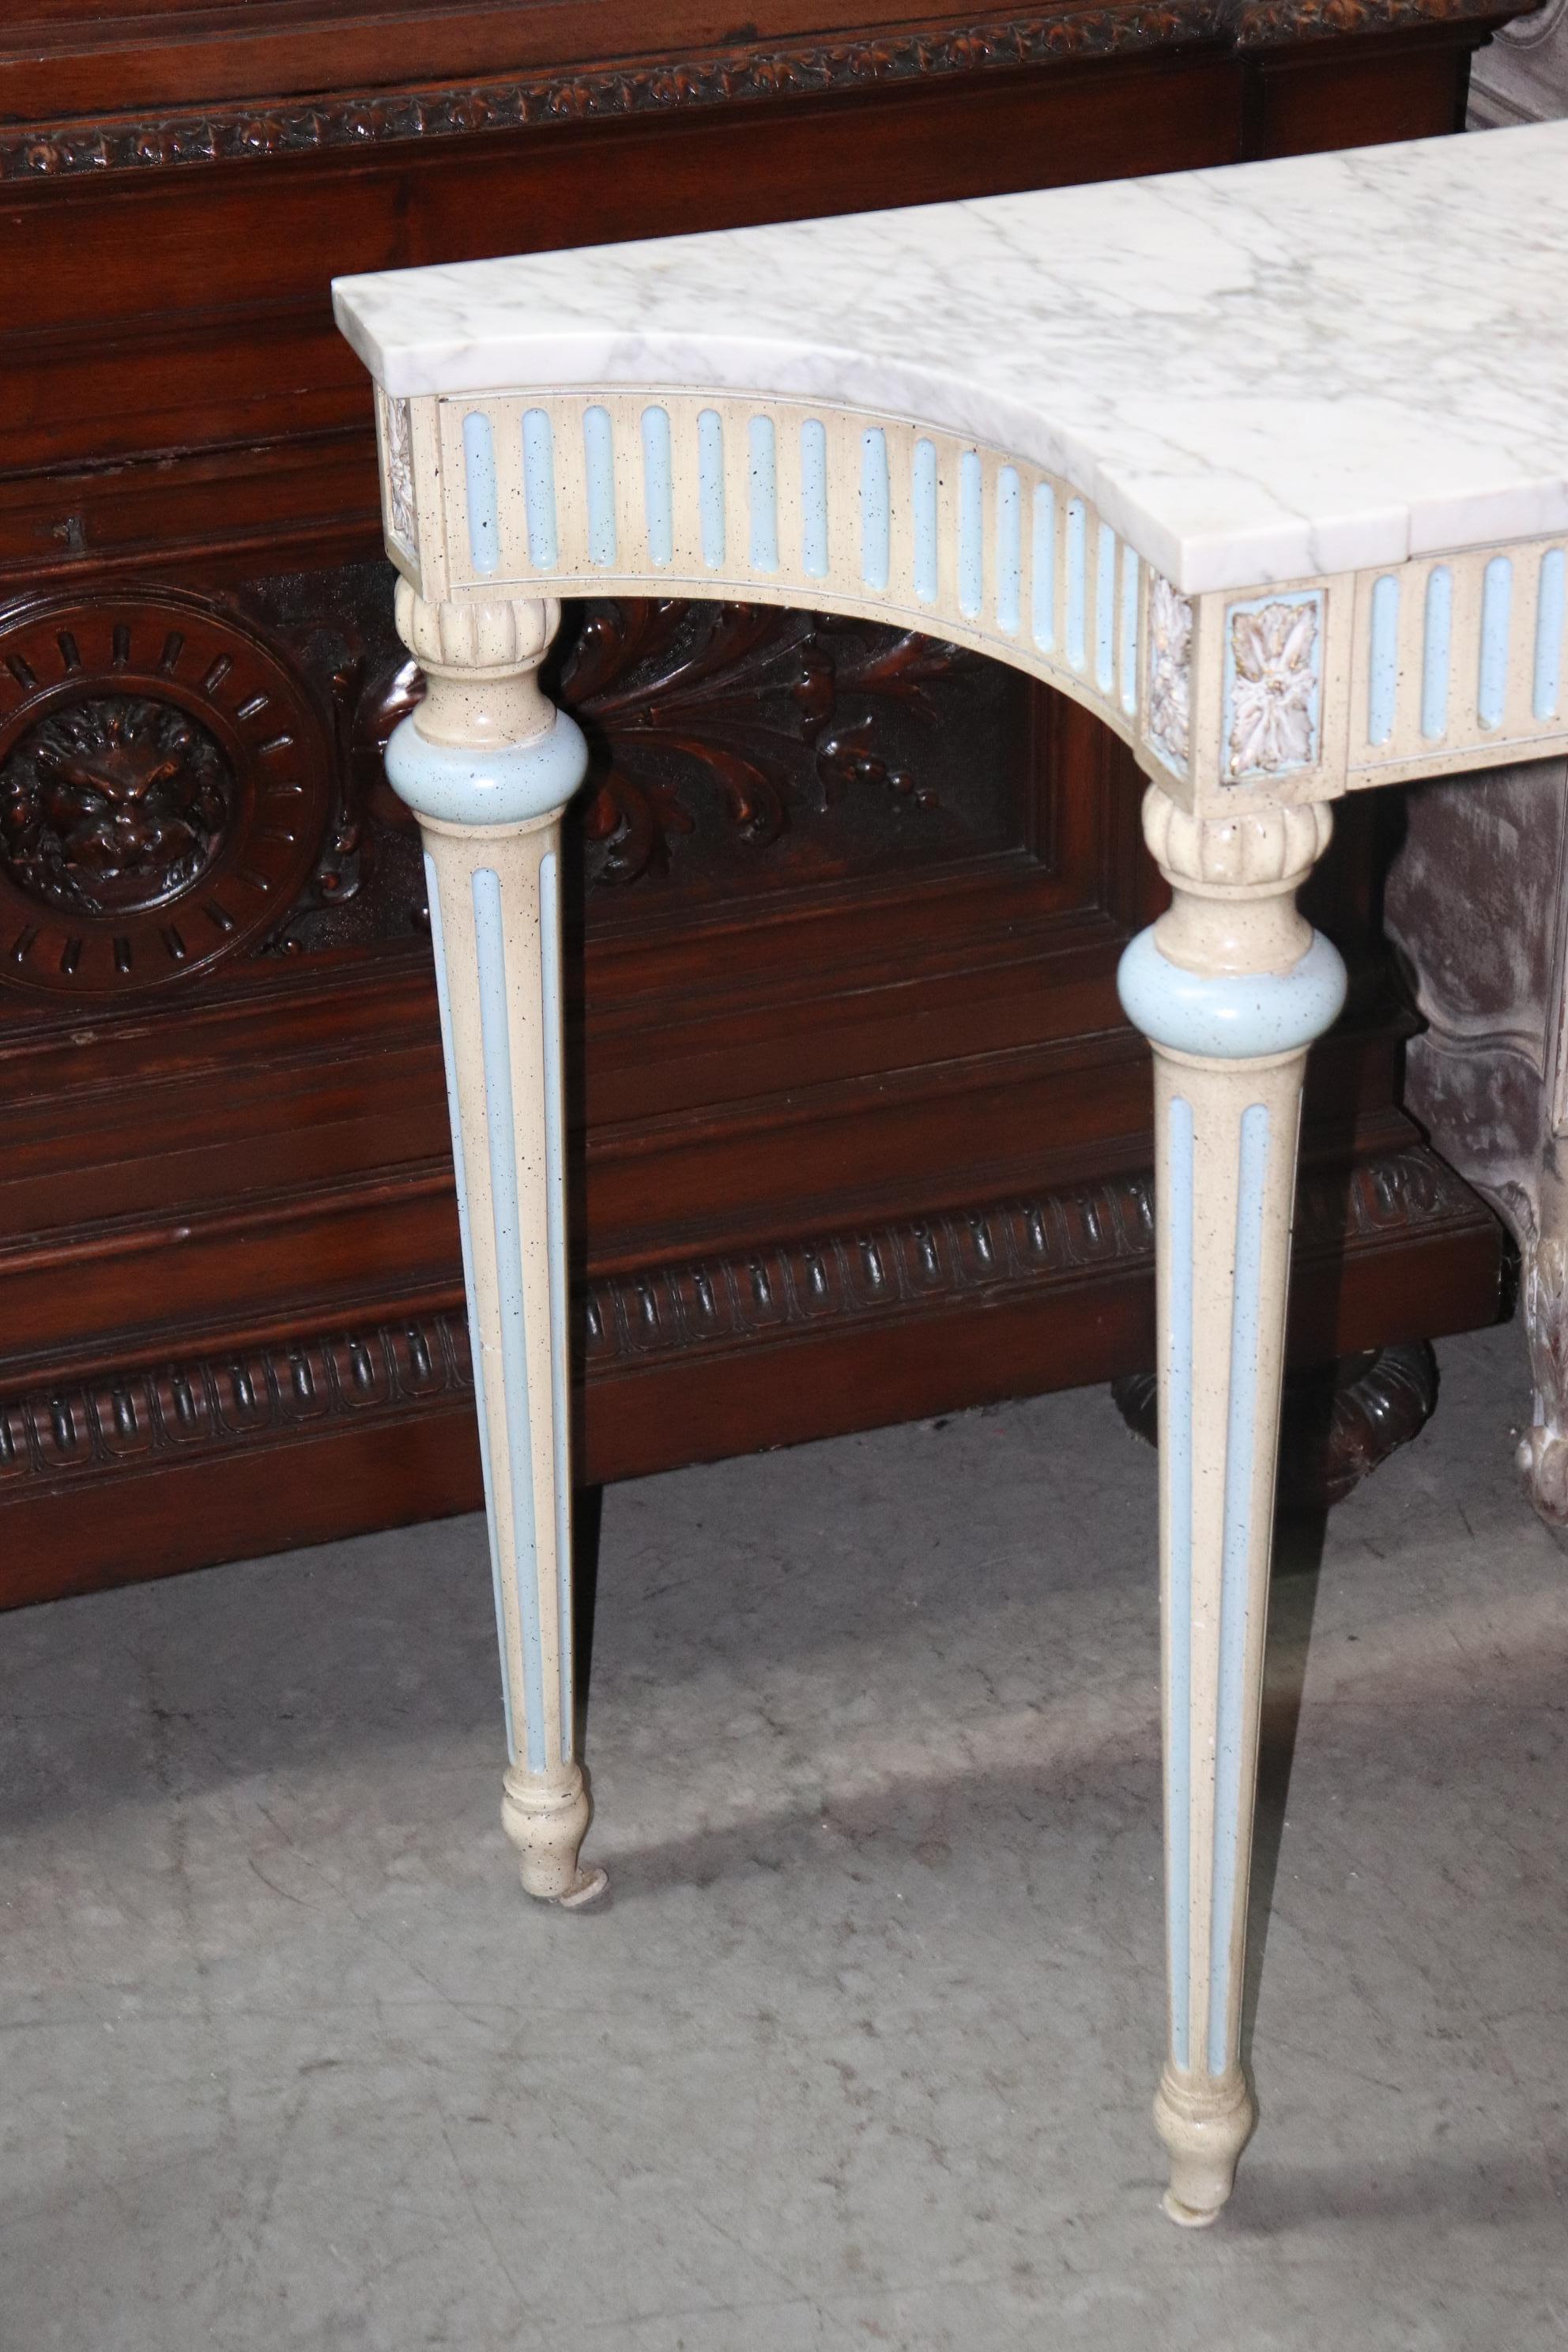 This is a superb American made French louis XVI style console table. The beautiful marble top is in very good condition and the frame is beautifully painted in white and blue. The table measures 61 wide x 16 deep x 32 tall.